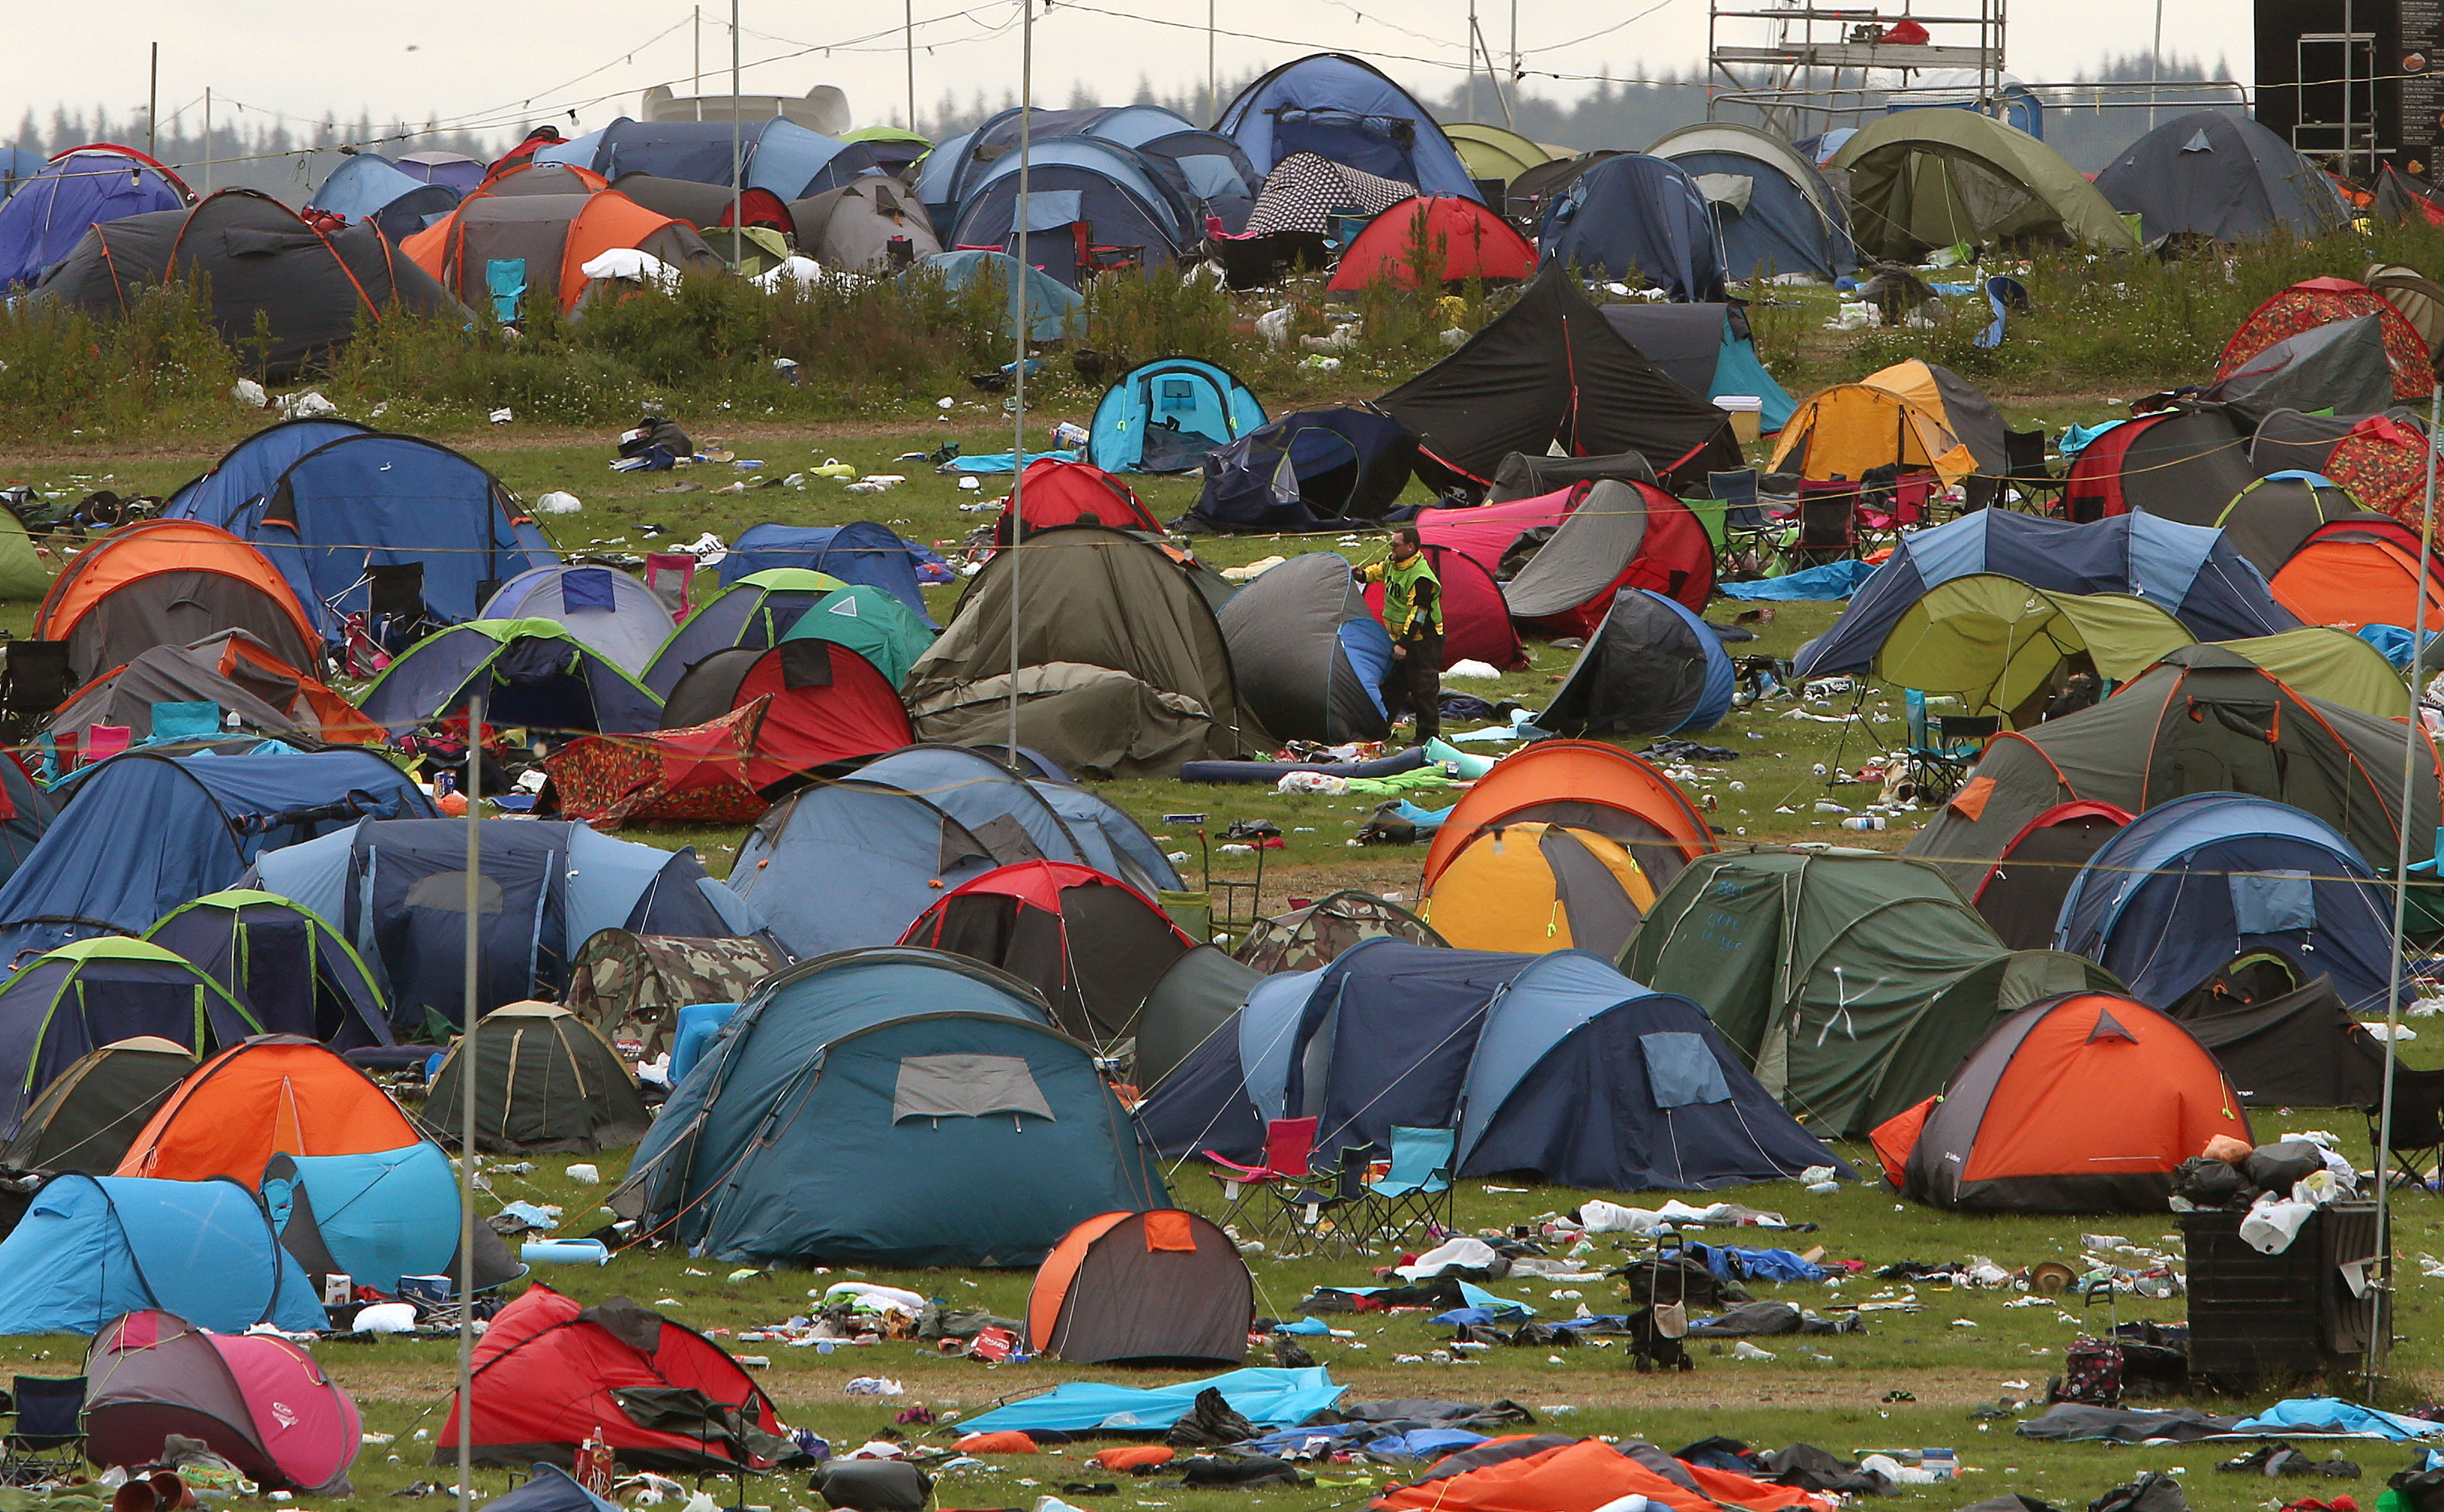 Thousands of tents were left behind.